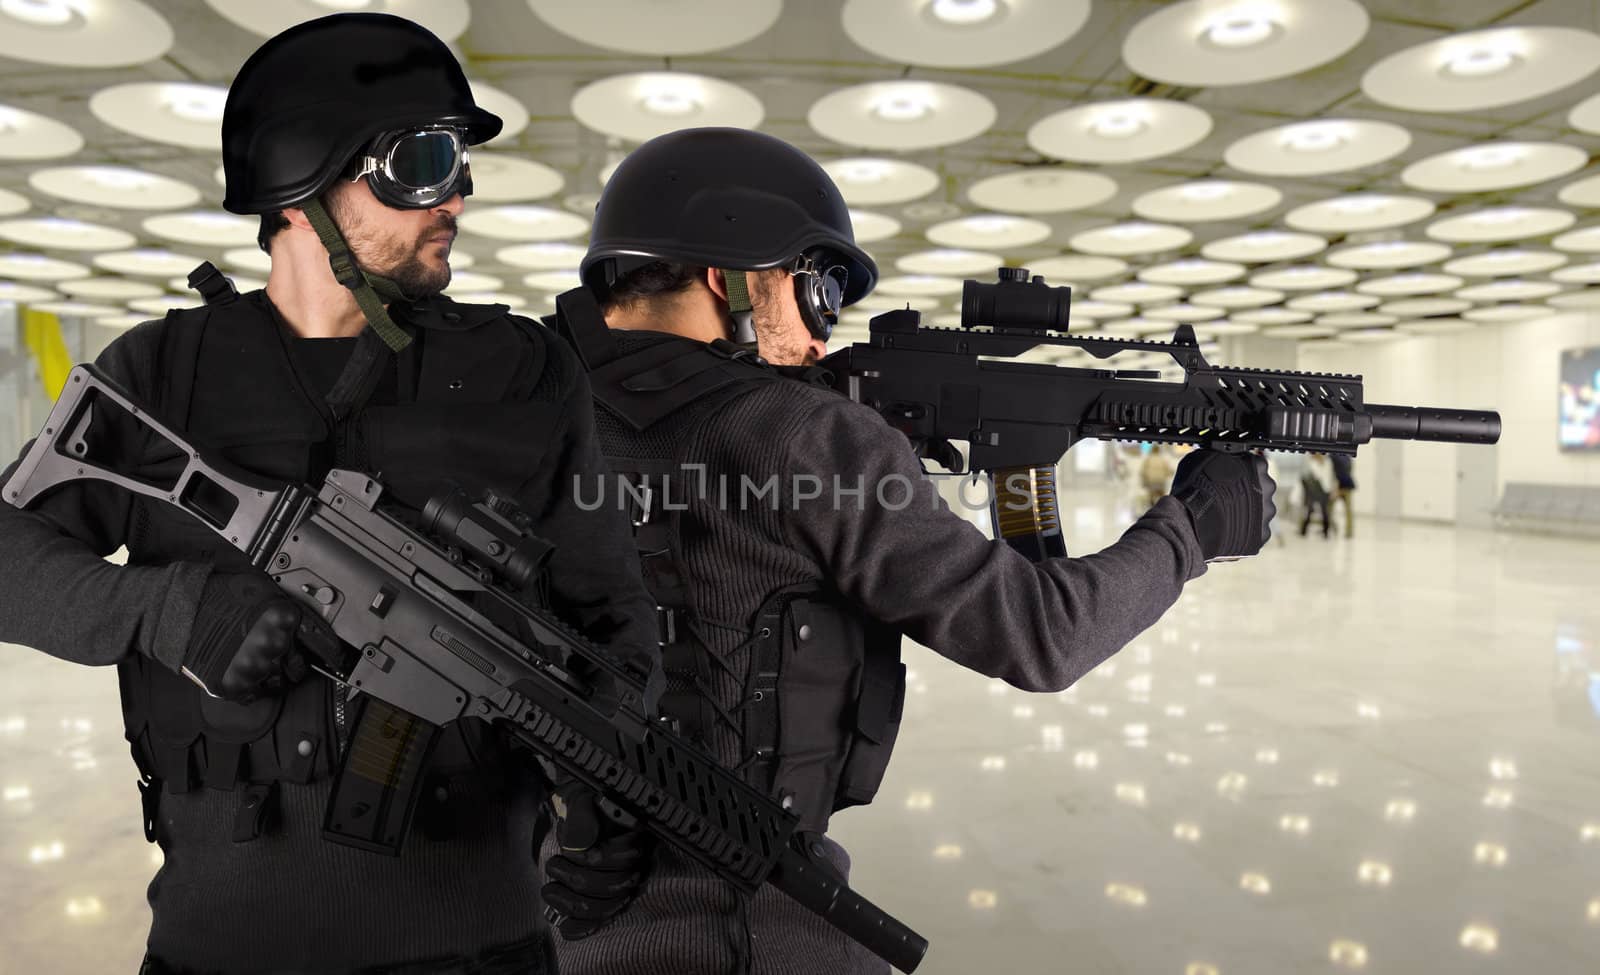 Defense against terrorism, two soldiers at an airport